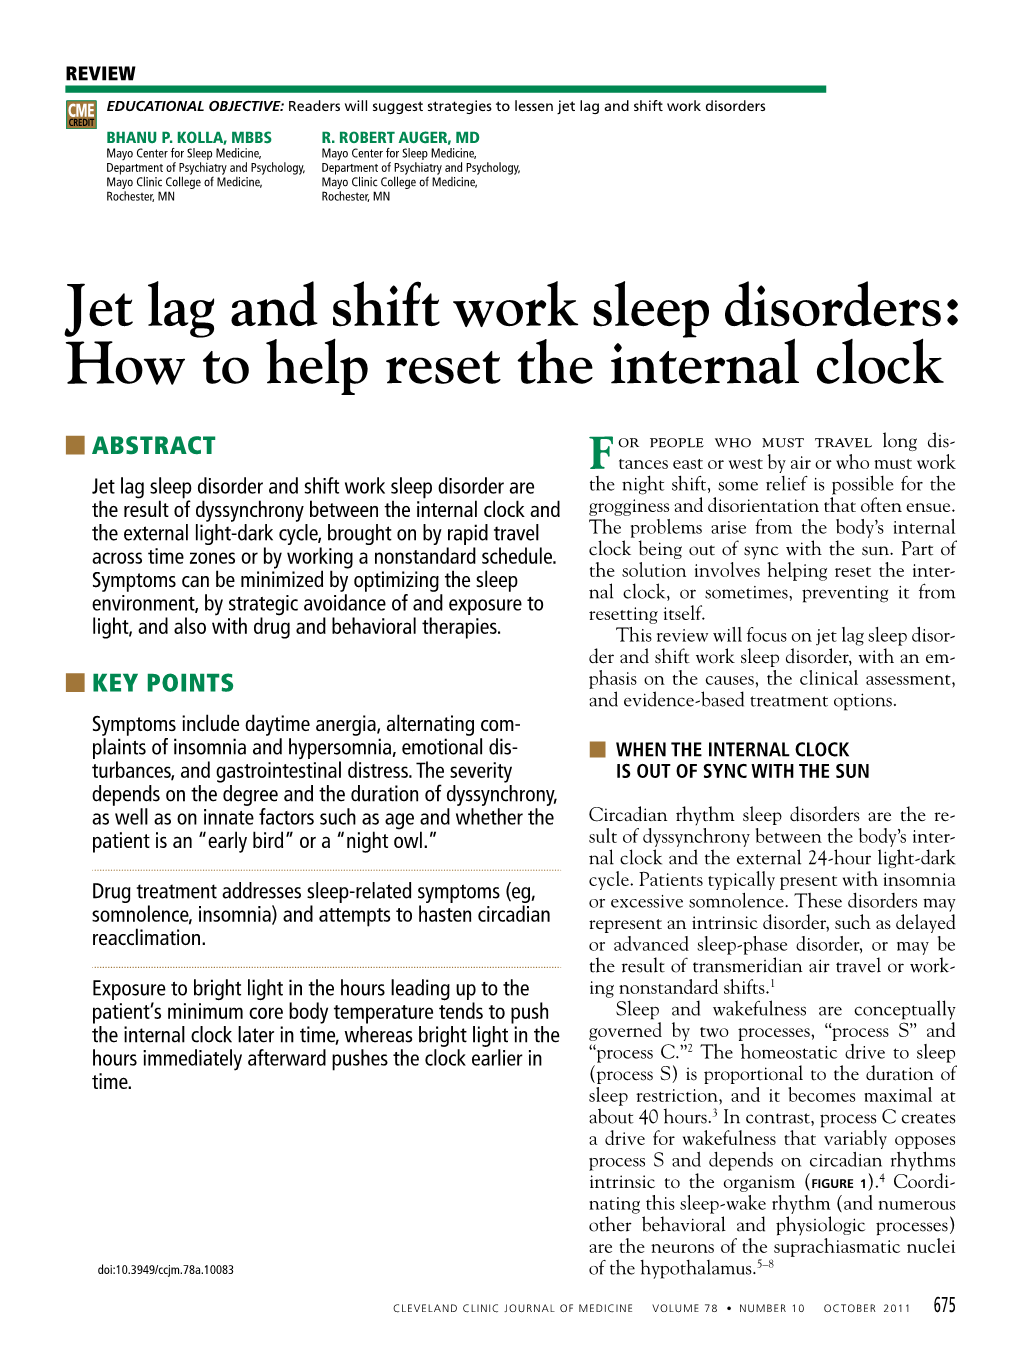 Jet Lag and Shift Work Sleep Disorders: How to Help Reset the Internal Clock